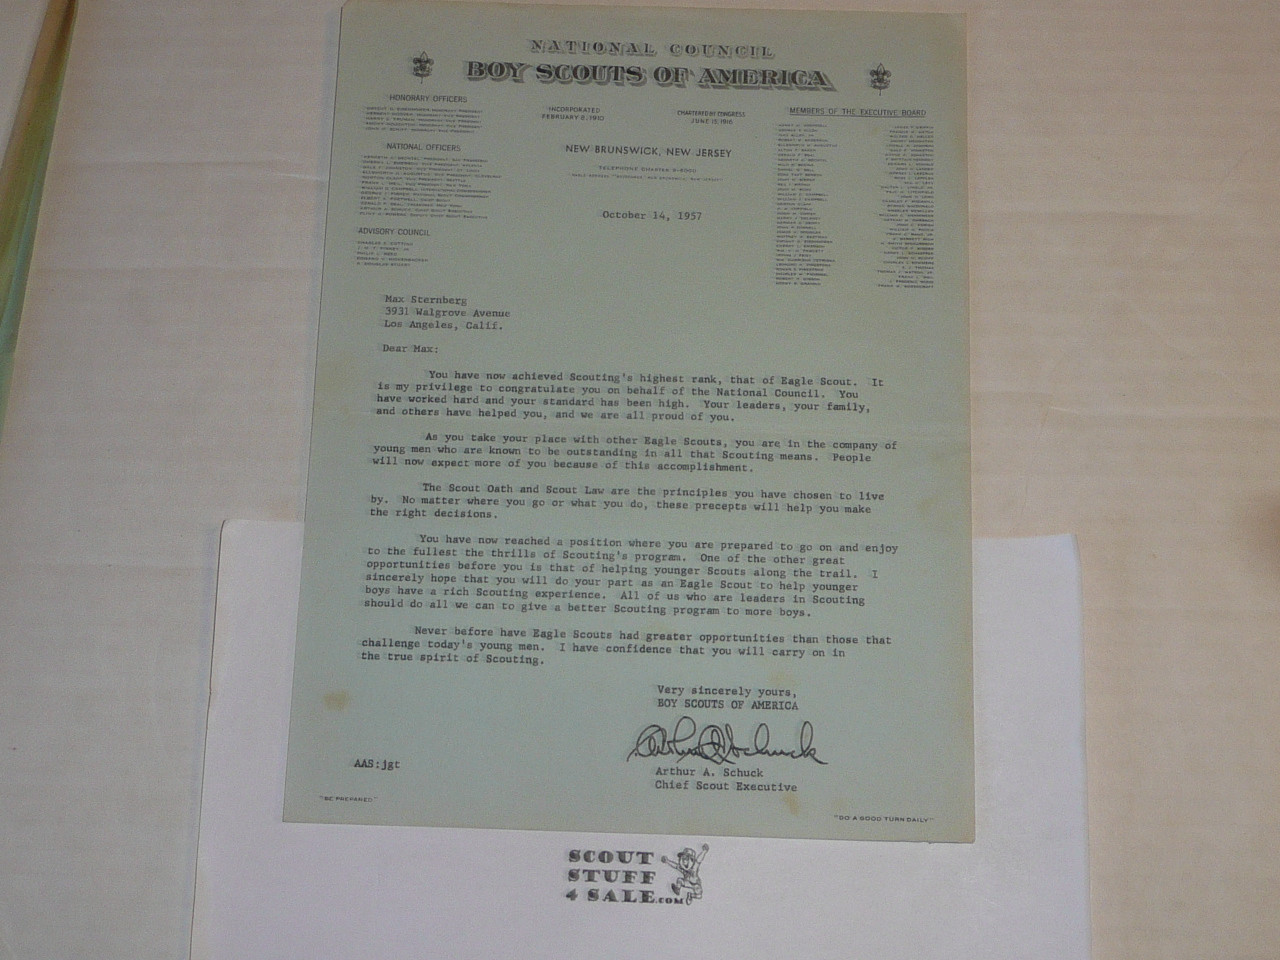 1937 Letter on Boy Scout National Headquarters Stationary from Arthur Schuck Congratulating Eagle Scout